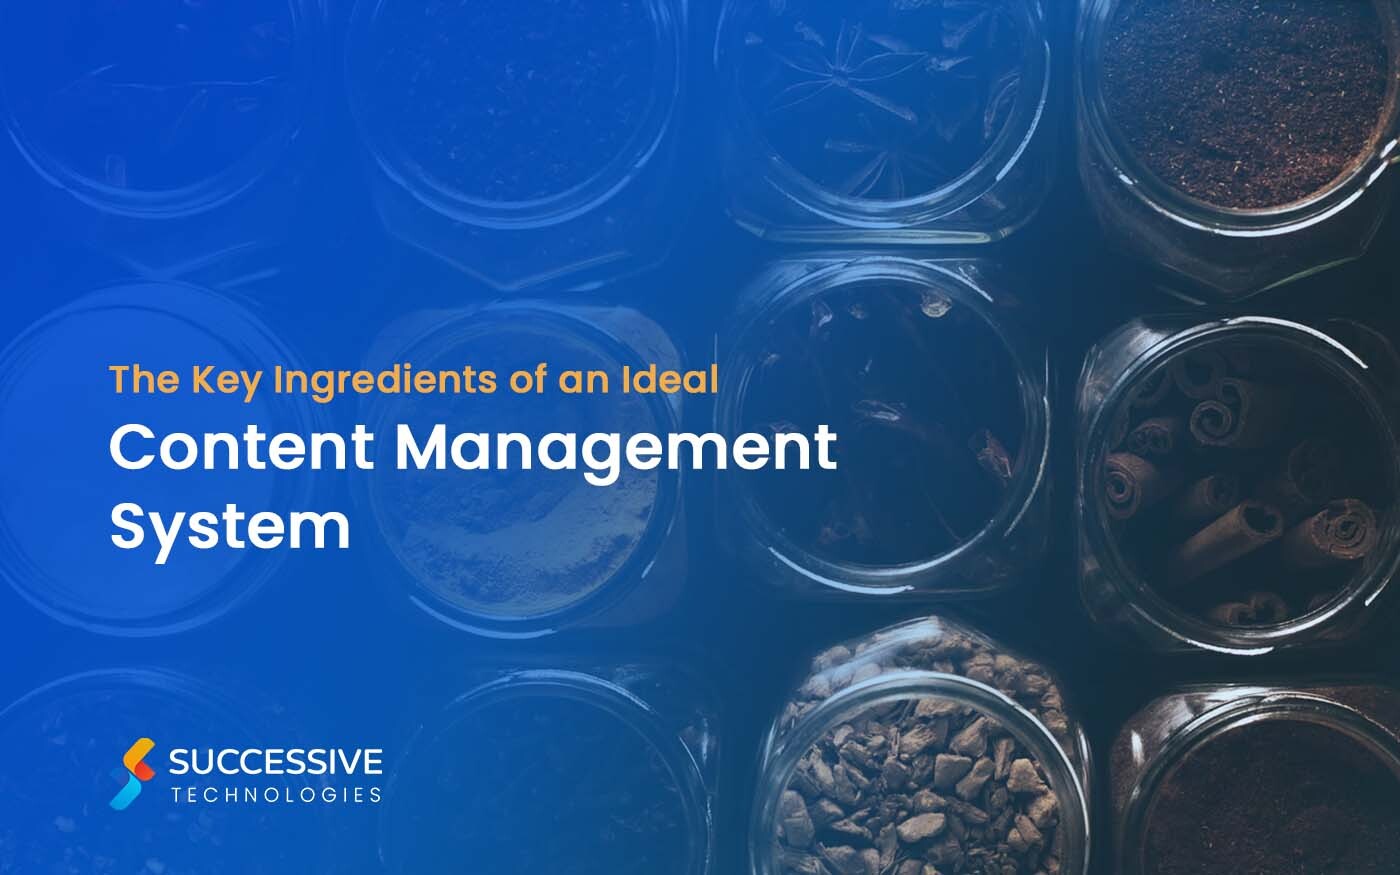 The Key Ingredients of an Ideal Content Management System